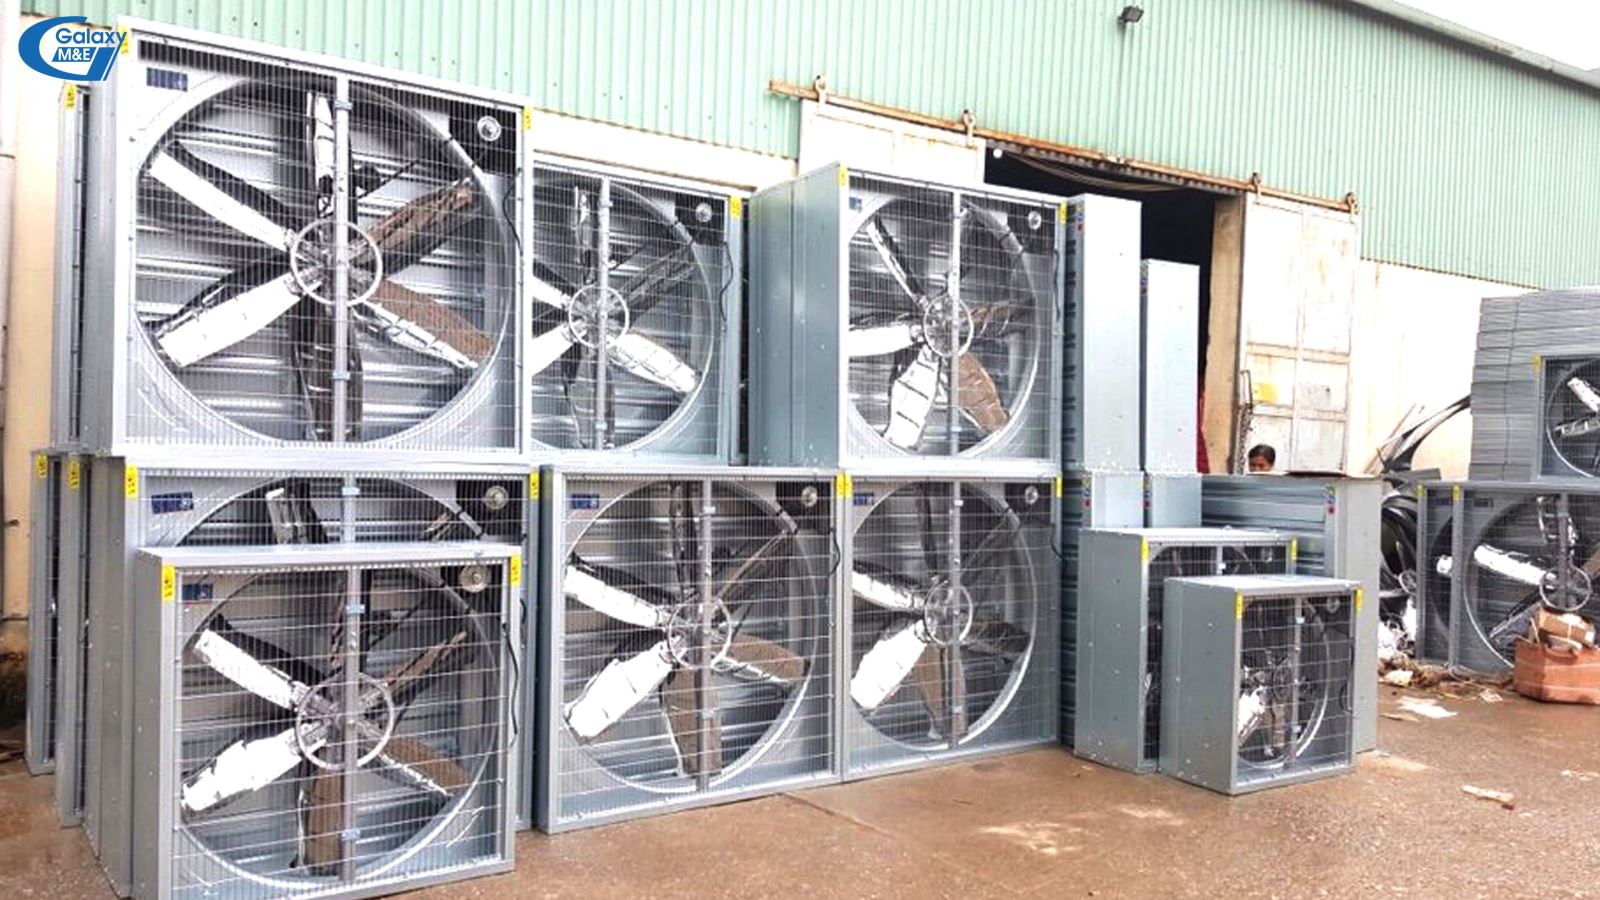 Industrial exhaust fans have advantages such as power, effectively supporting the ventilation in factories and businesses